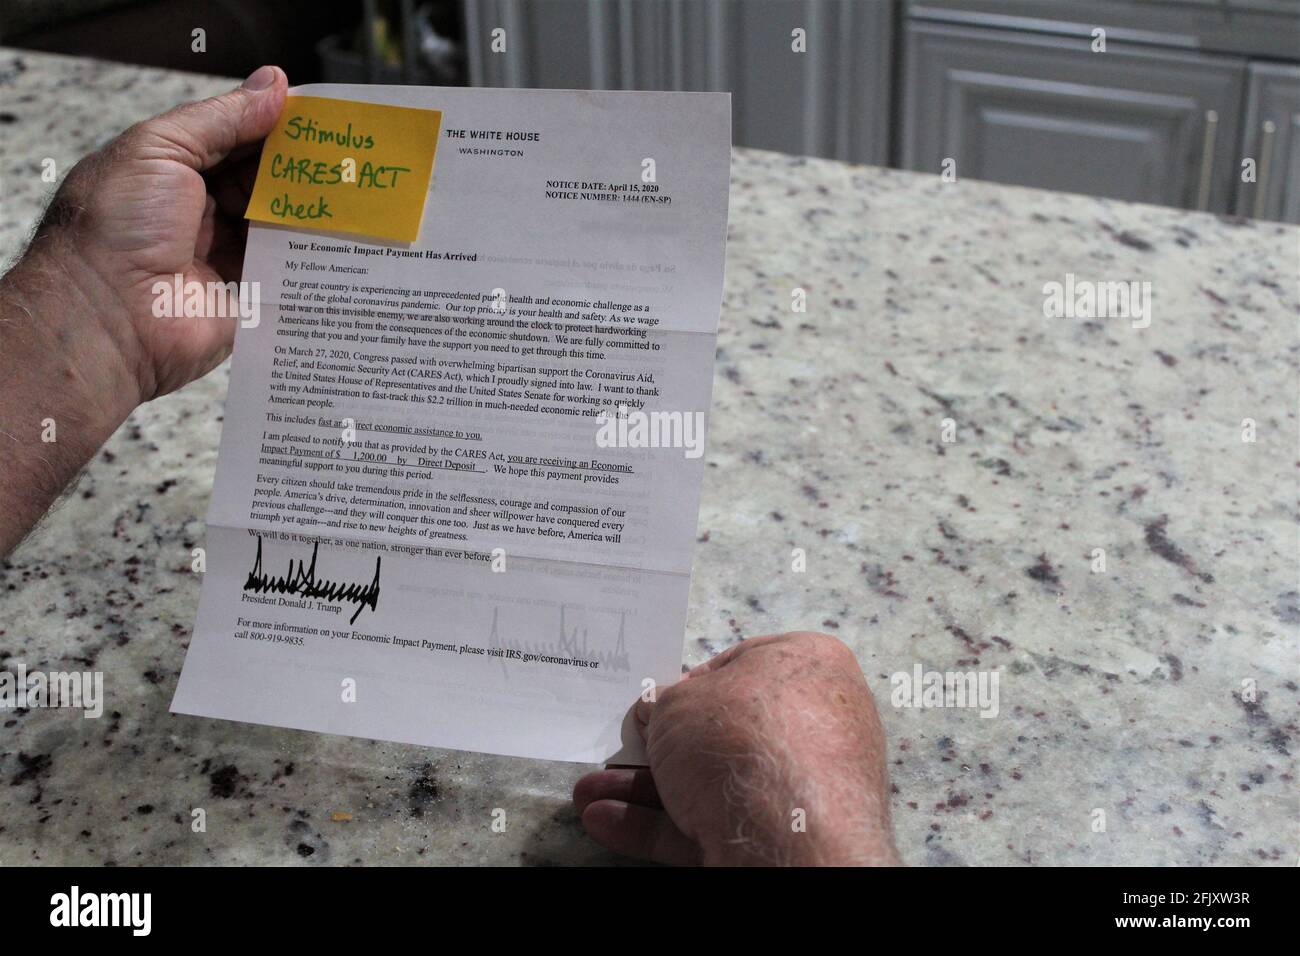 American receives a letter from Donald Trump & the IRS regarding Stimulus check for $1,200 because of the Corona virus COVID-19 pandemic. CARES ACT Stock Photo